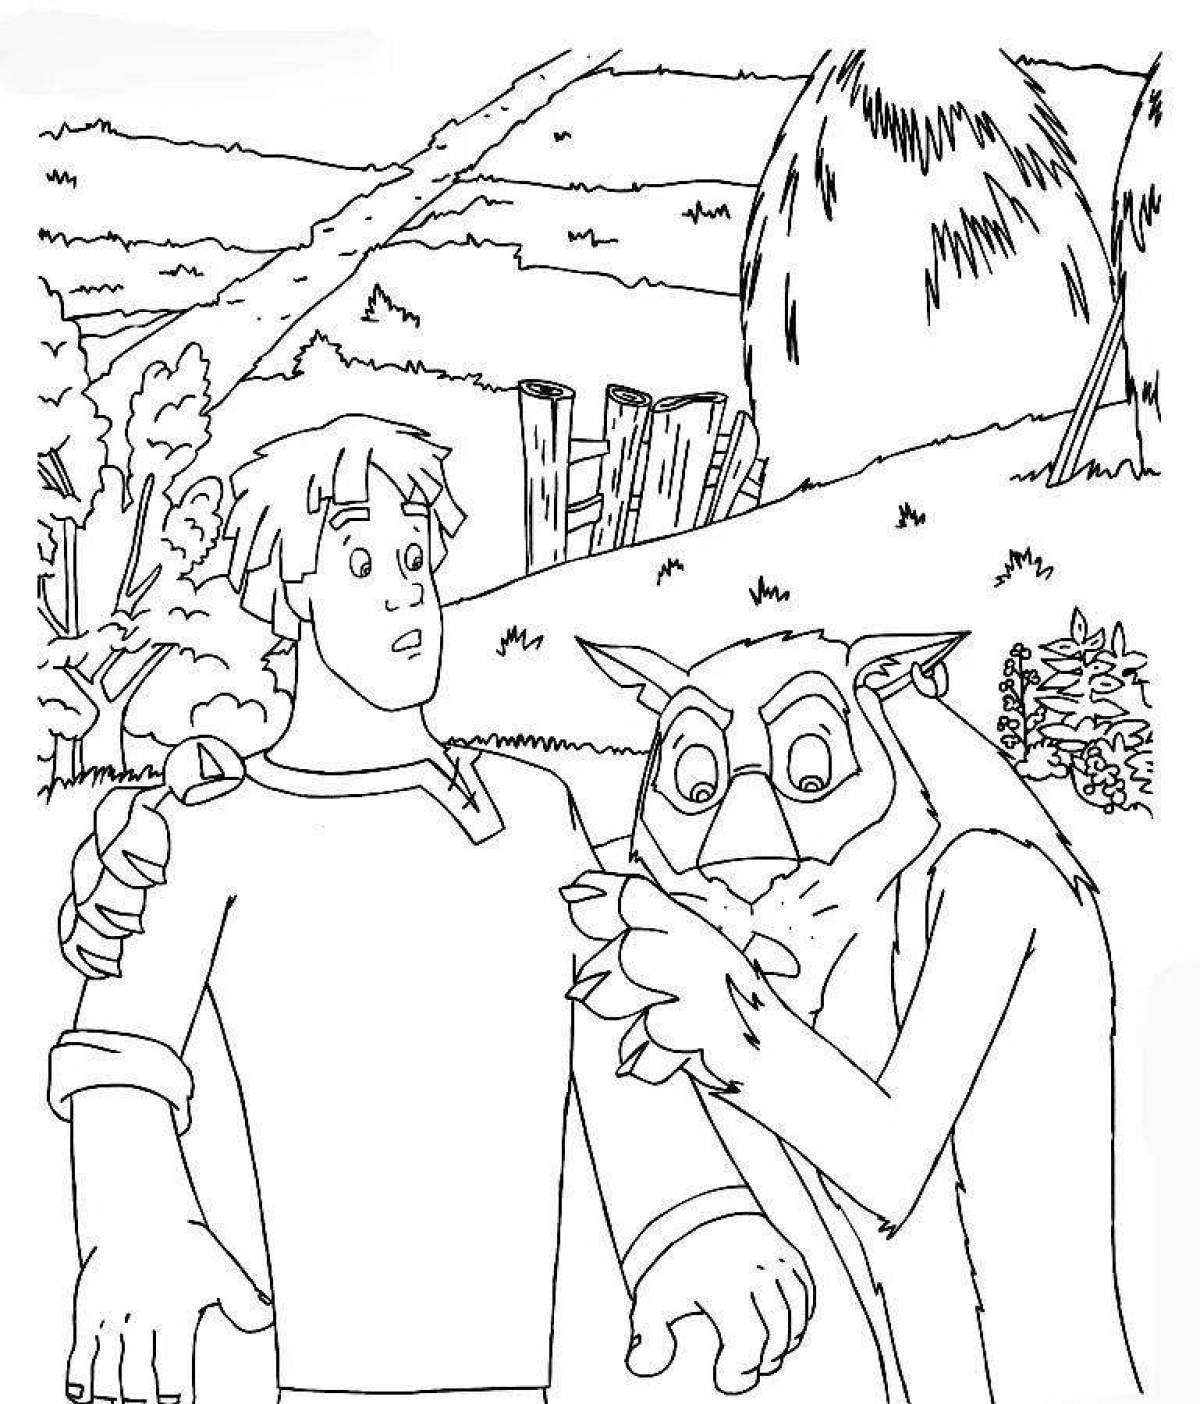 Charming ivan tsarevich and the gray wolf 4 coloring